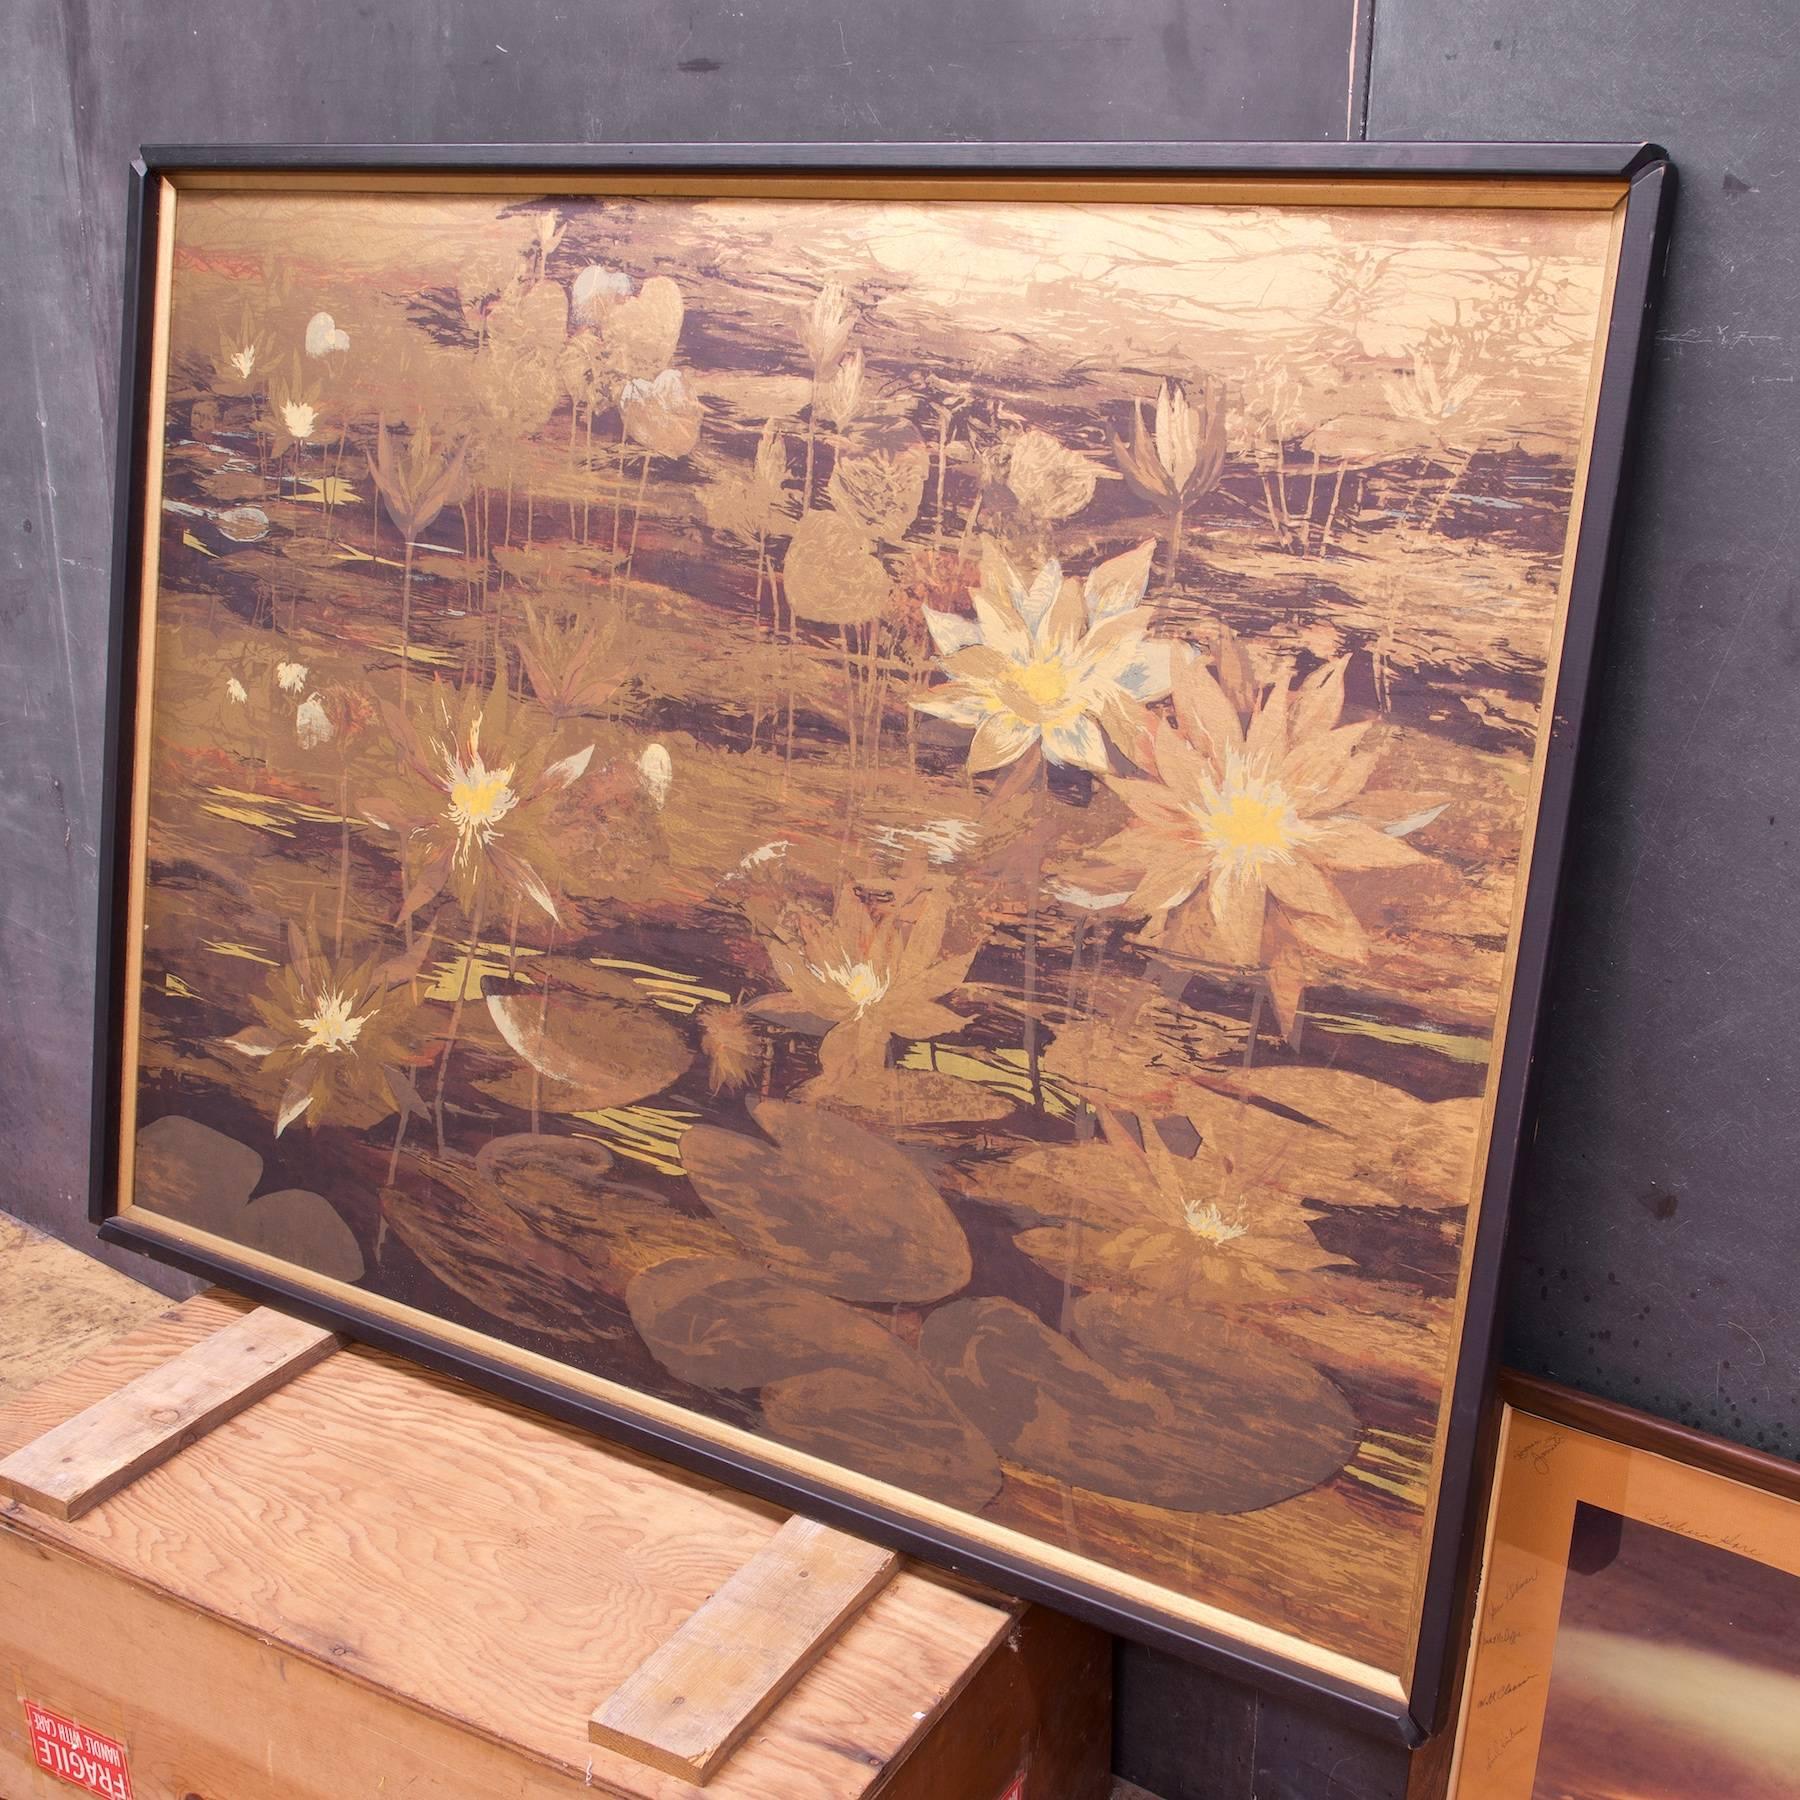 USA, circa 1960s. Lyn Howley Water Lilies Studio editions lithograph on framed board. Monumental size, in Earthtones, Metallics and Golds. Made in Culver City California, by Van Amstel Company. 
Approx. 5 foot by 3 foot.